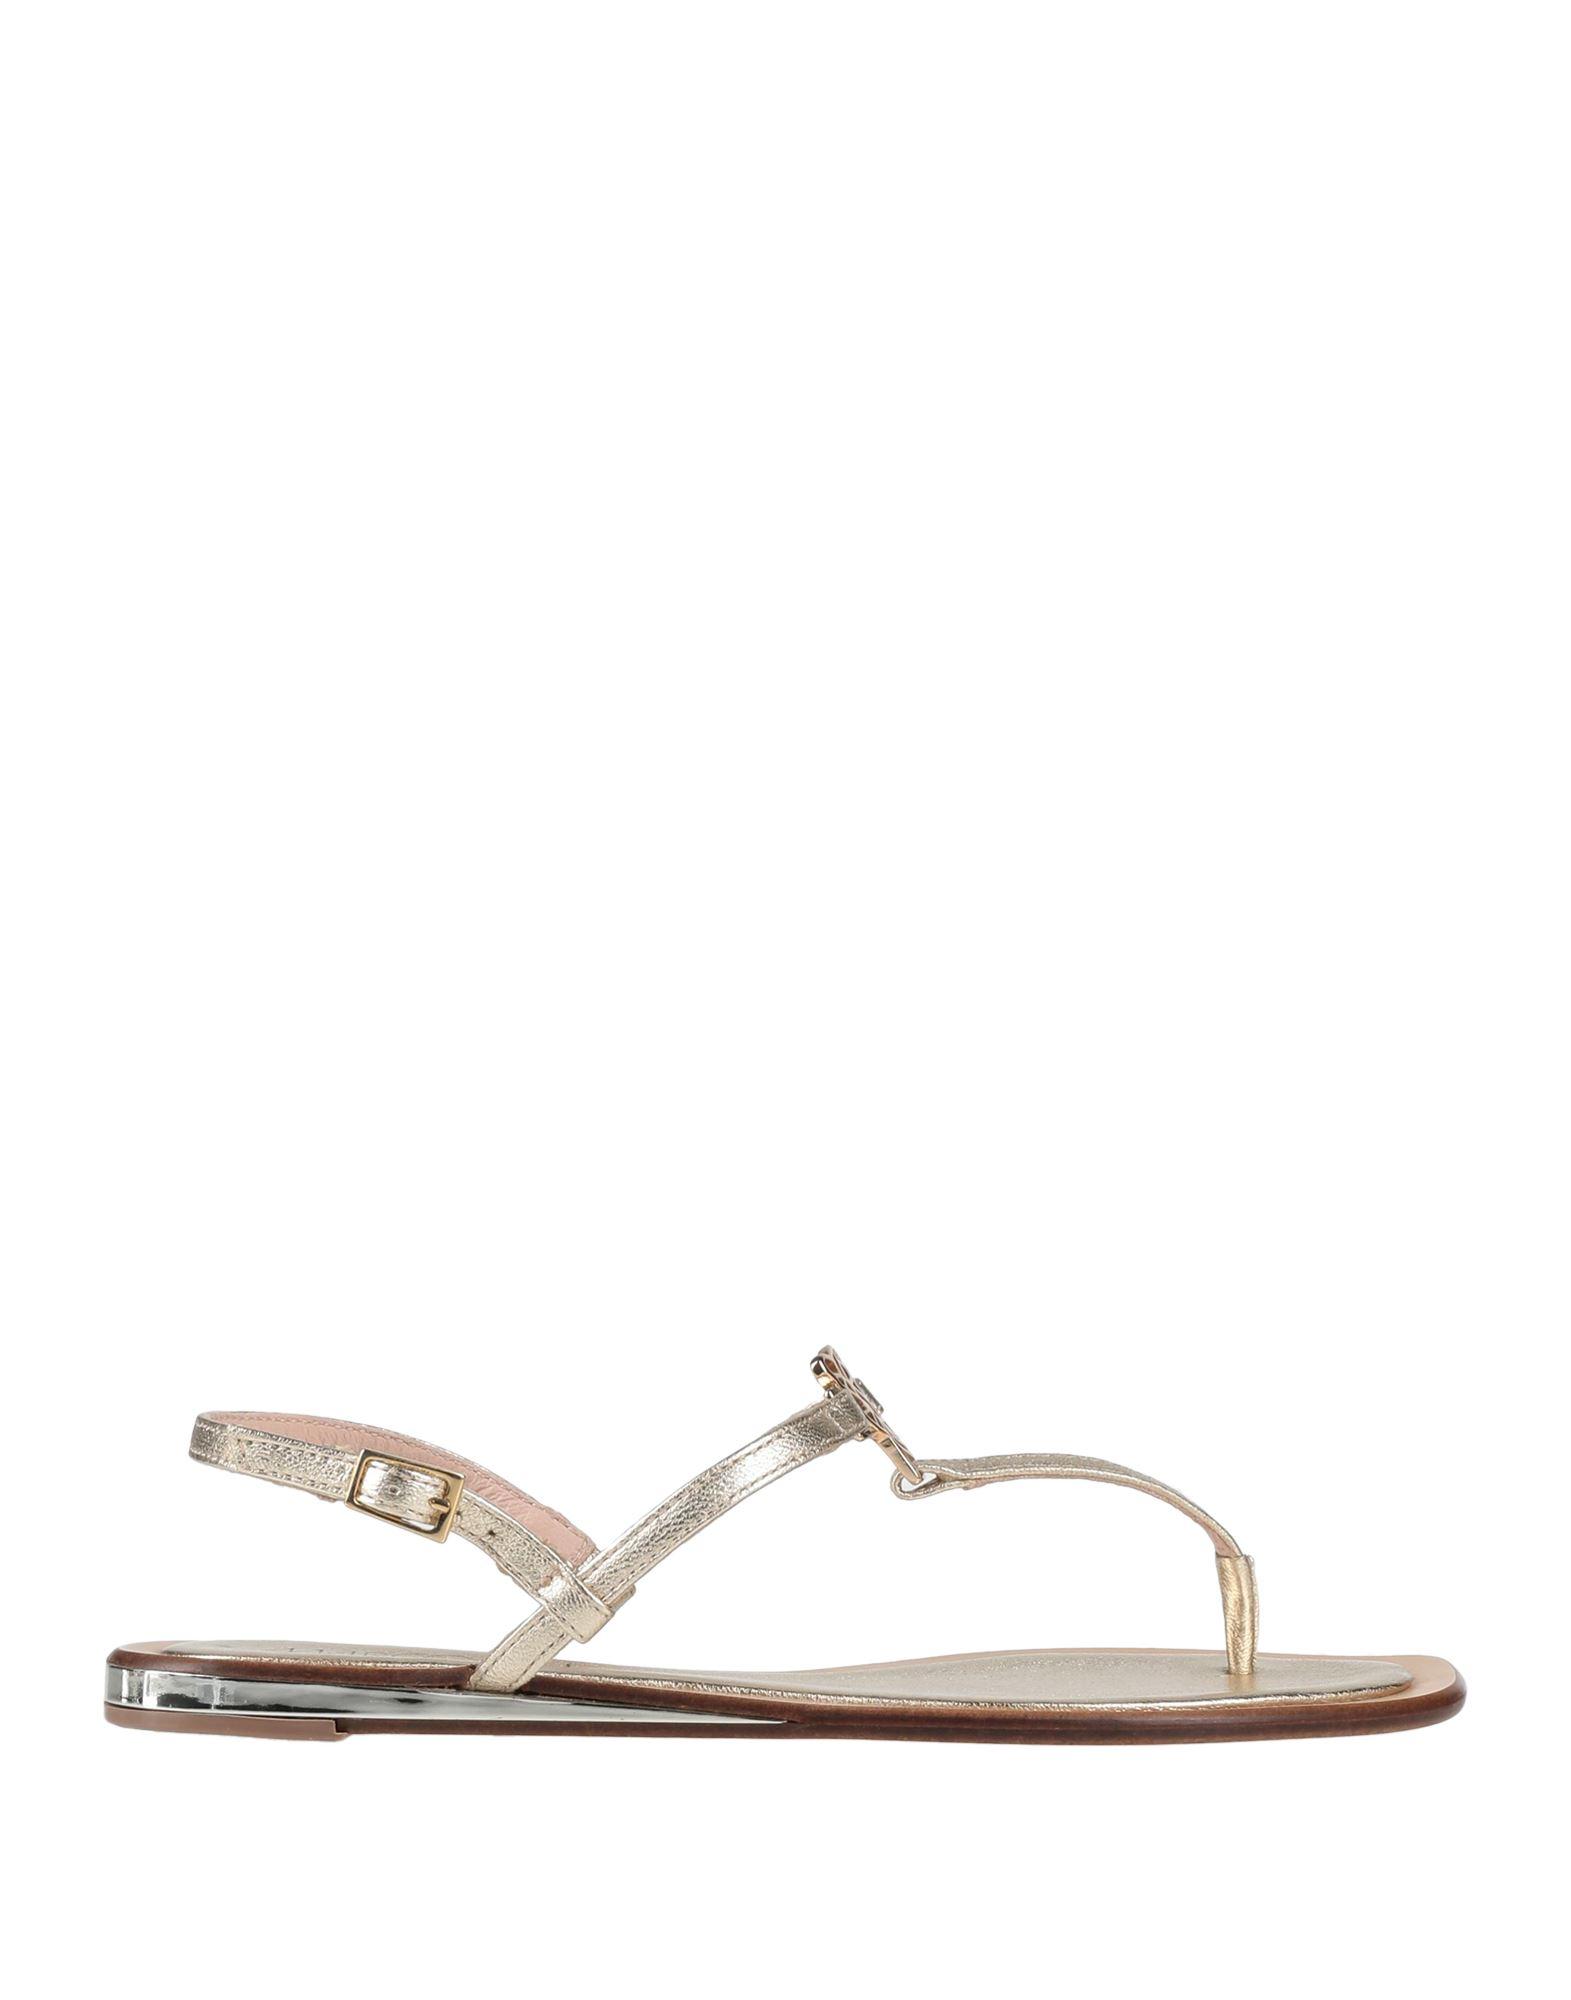 Marc Cain Toe Strap Sandals in White | Lyst